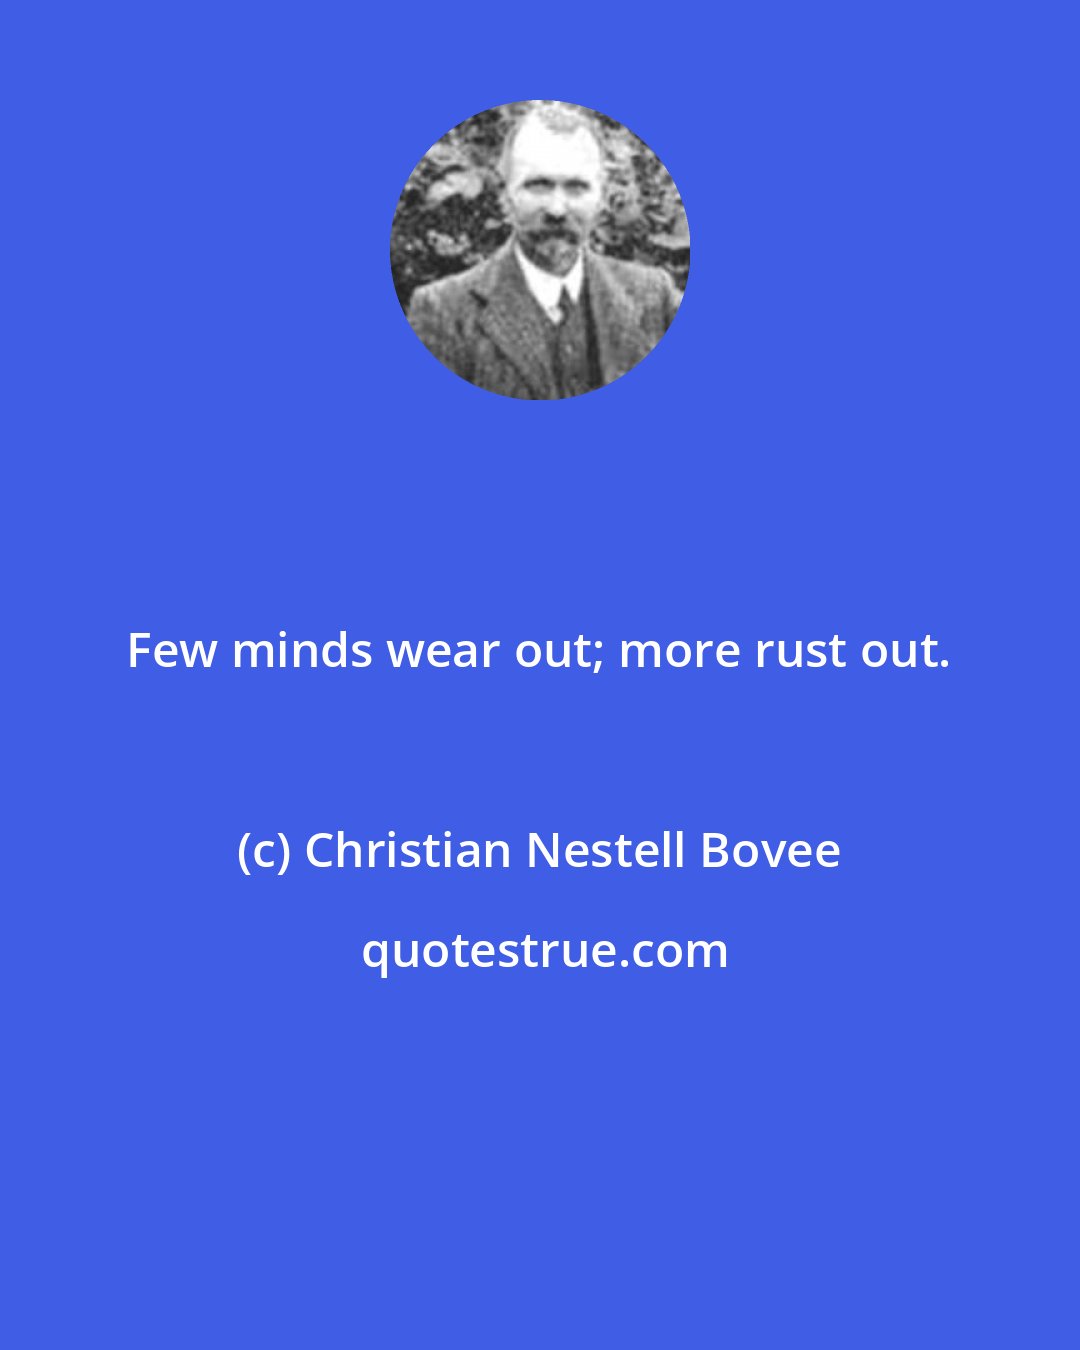 Christian Nestell Bovee: Few minds wear out; more rust out.